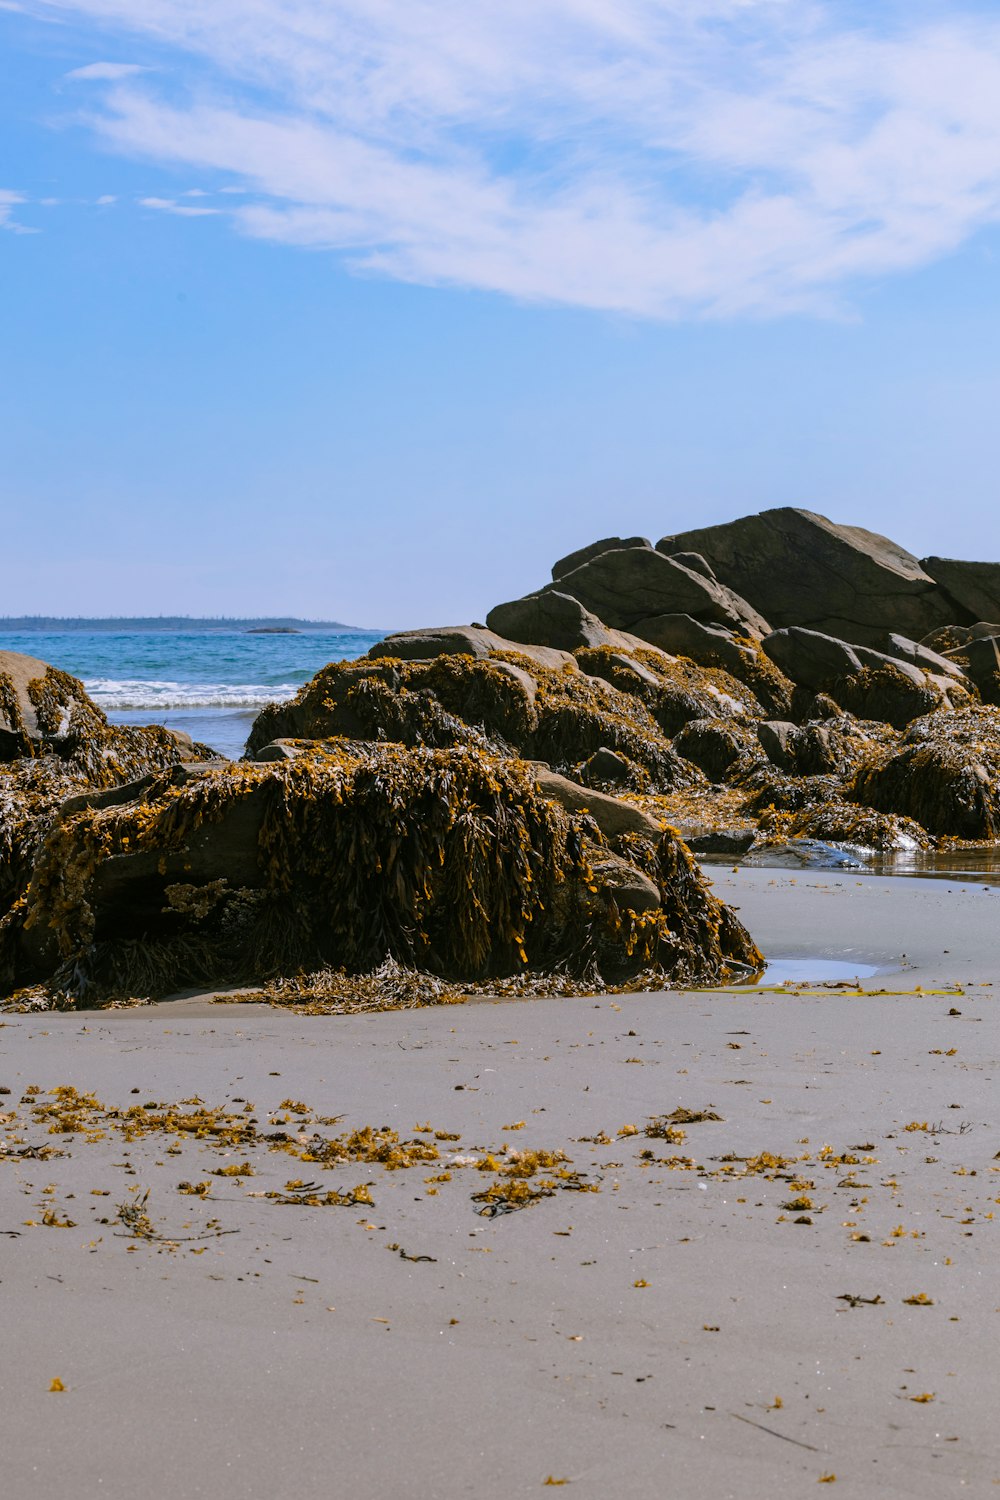 a sandy beach with rocks and seaweed on it